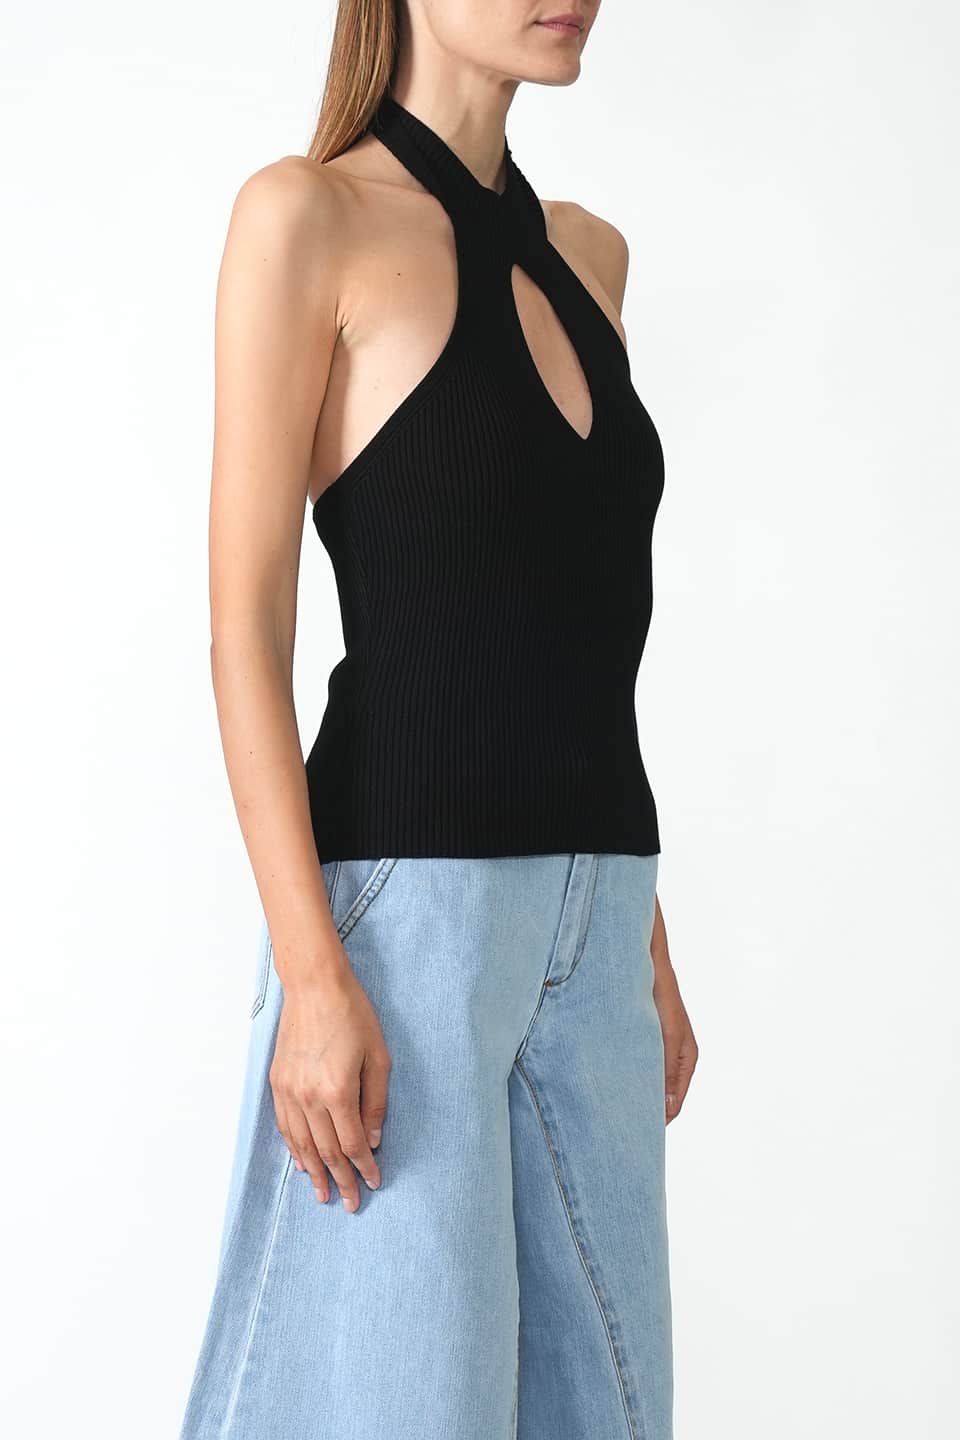 Thumbnail for Product gallery 3, Backless Stretch Top Black